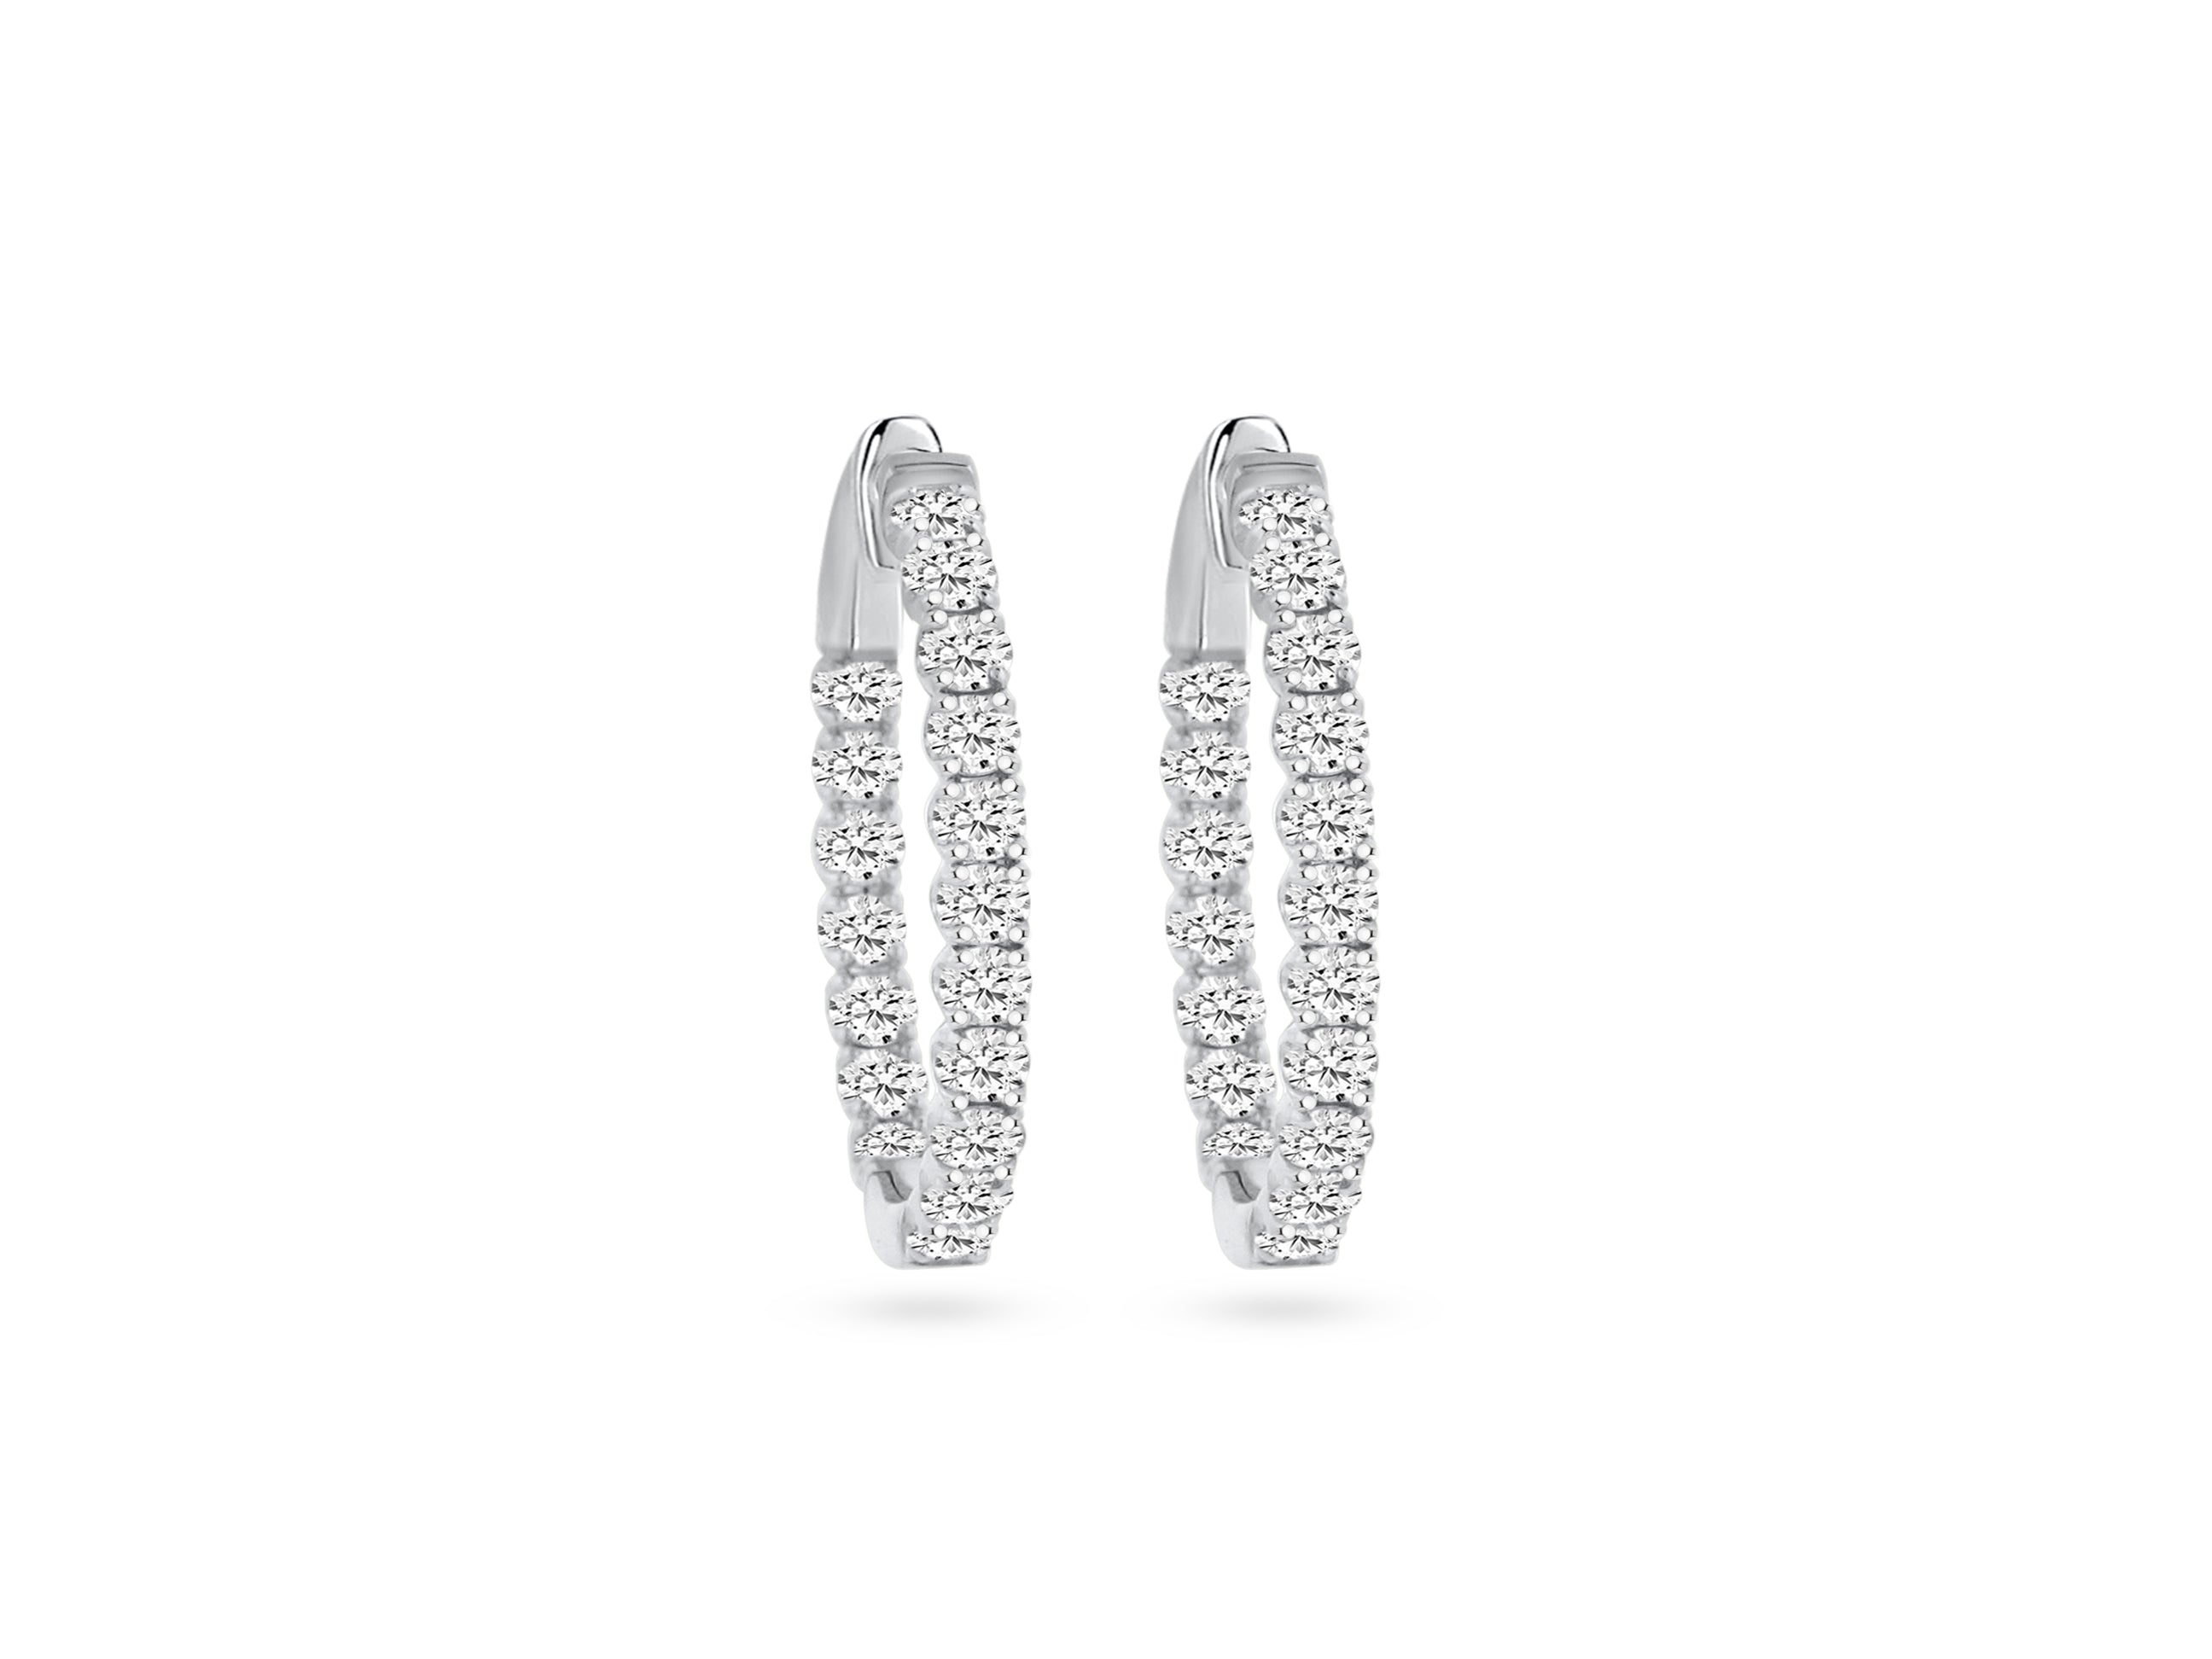 MULLOYS PRIVE'14K WHITE GOLD 2.00CT SI1-2 CLARITY AND G-H COLOR DIAMOND INSIDE OUT HOOPS